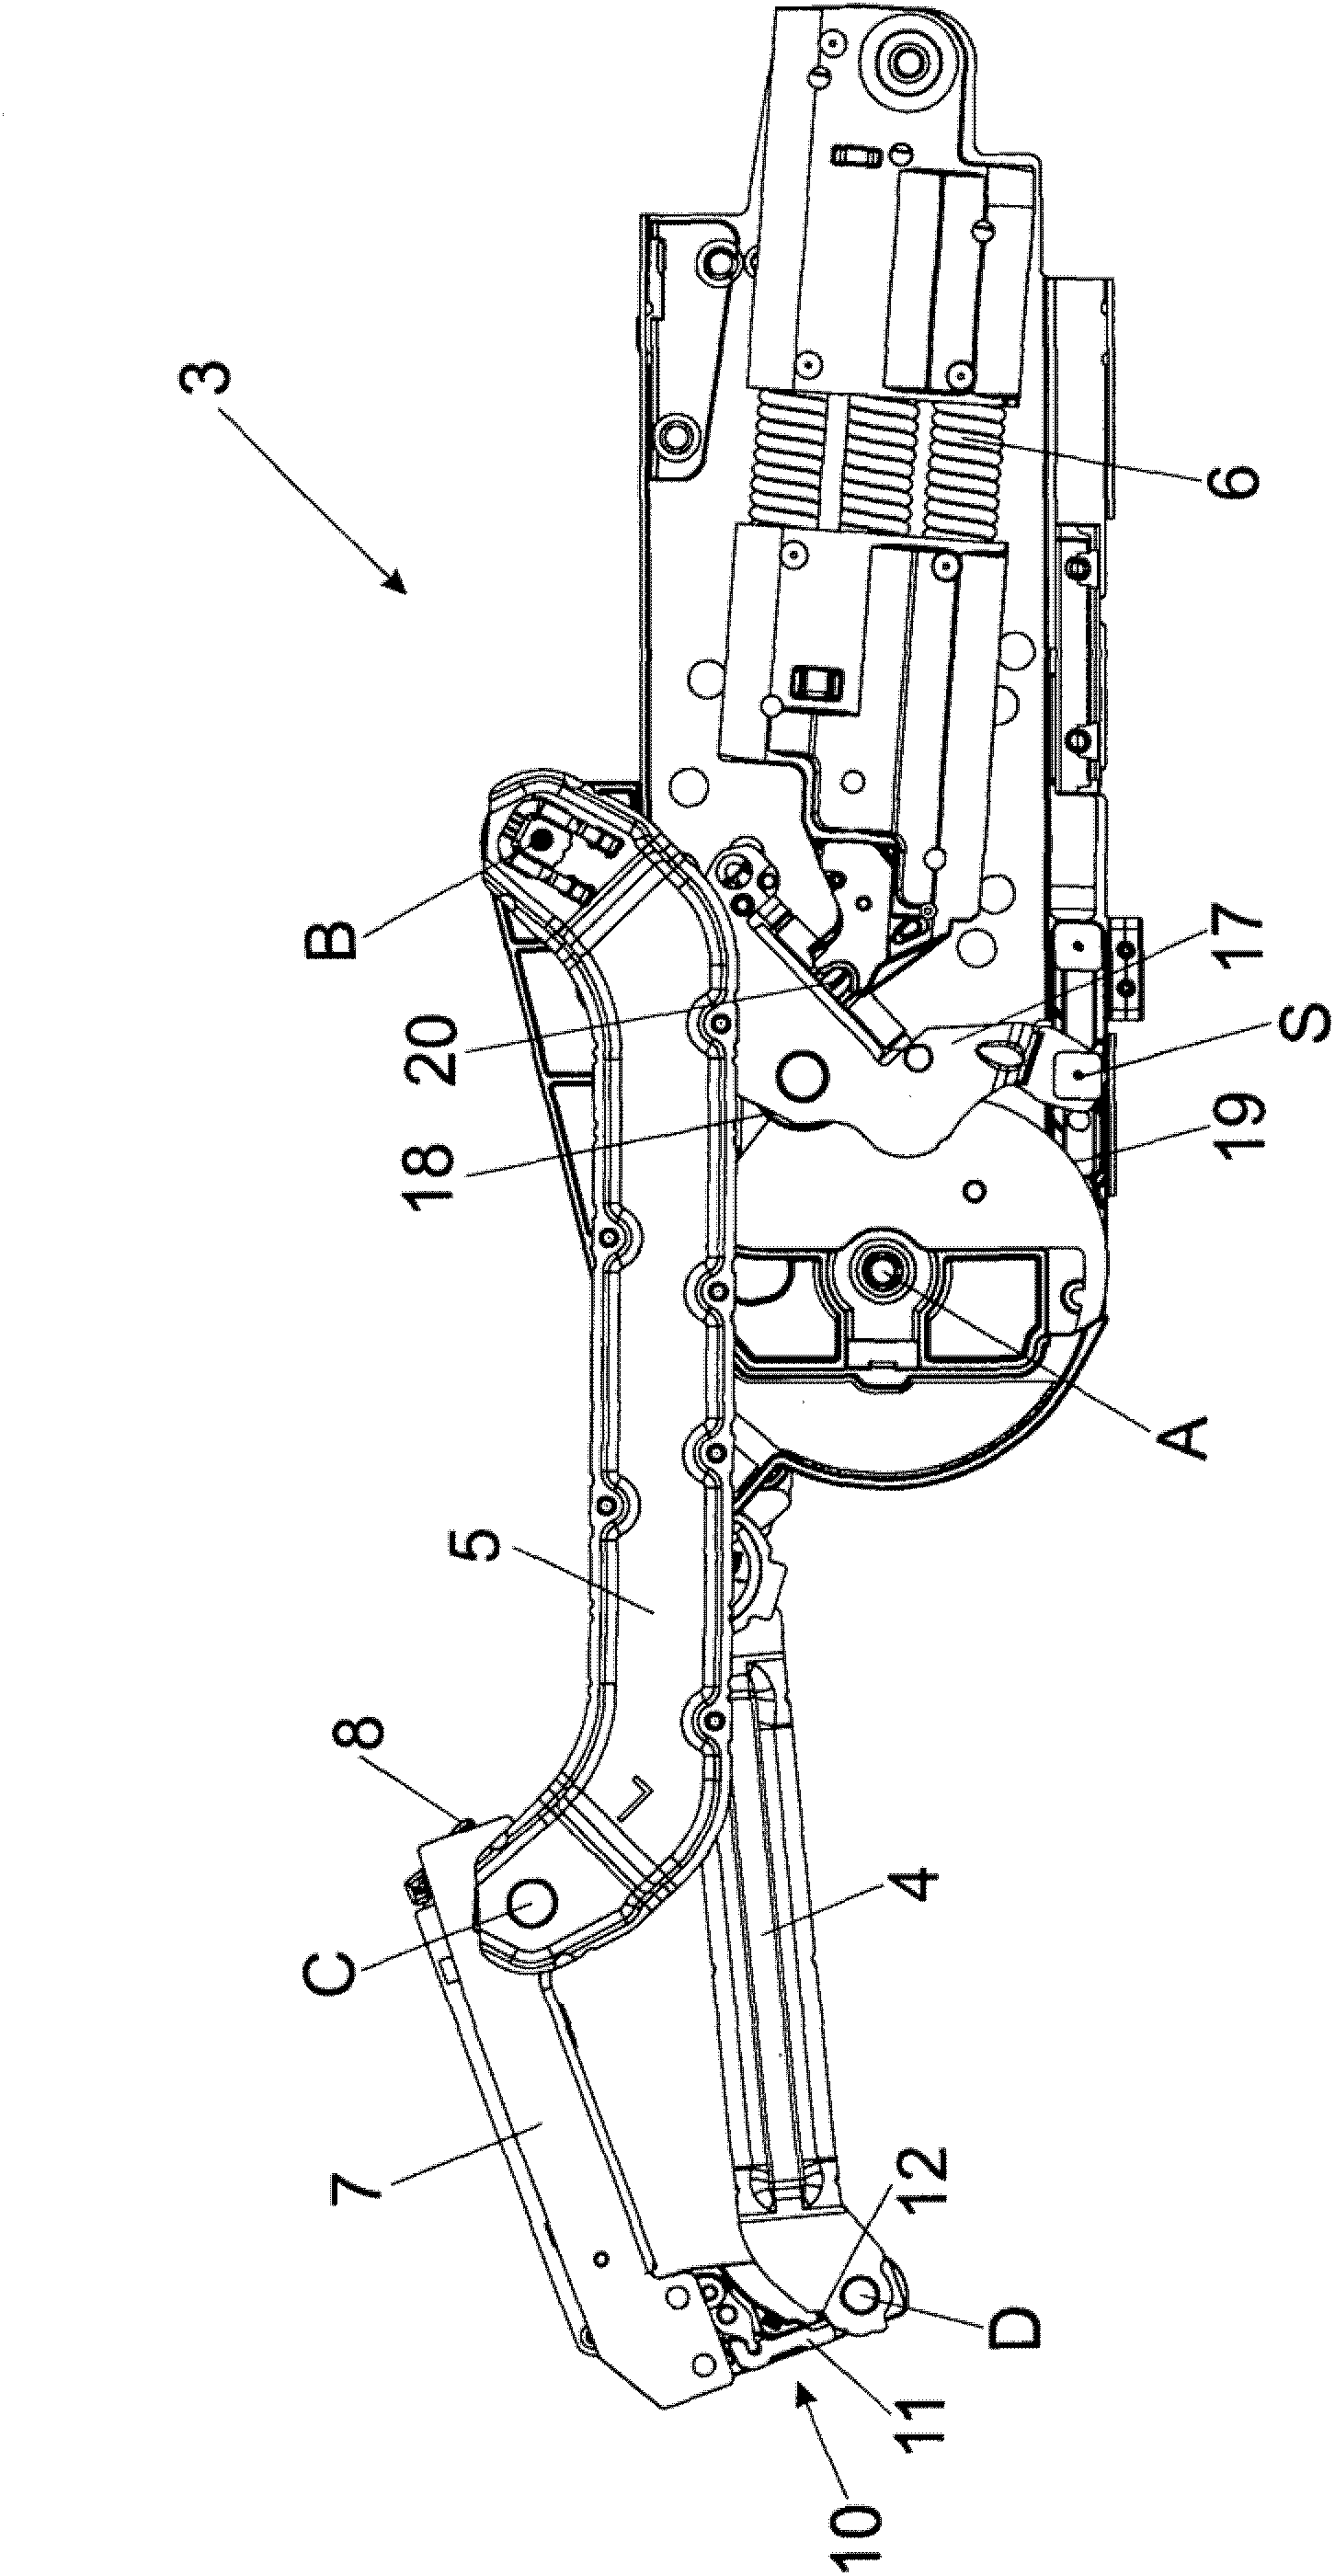 Actuating drive for a movable furniture part